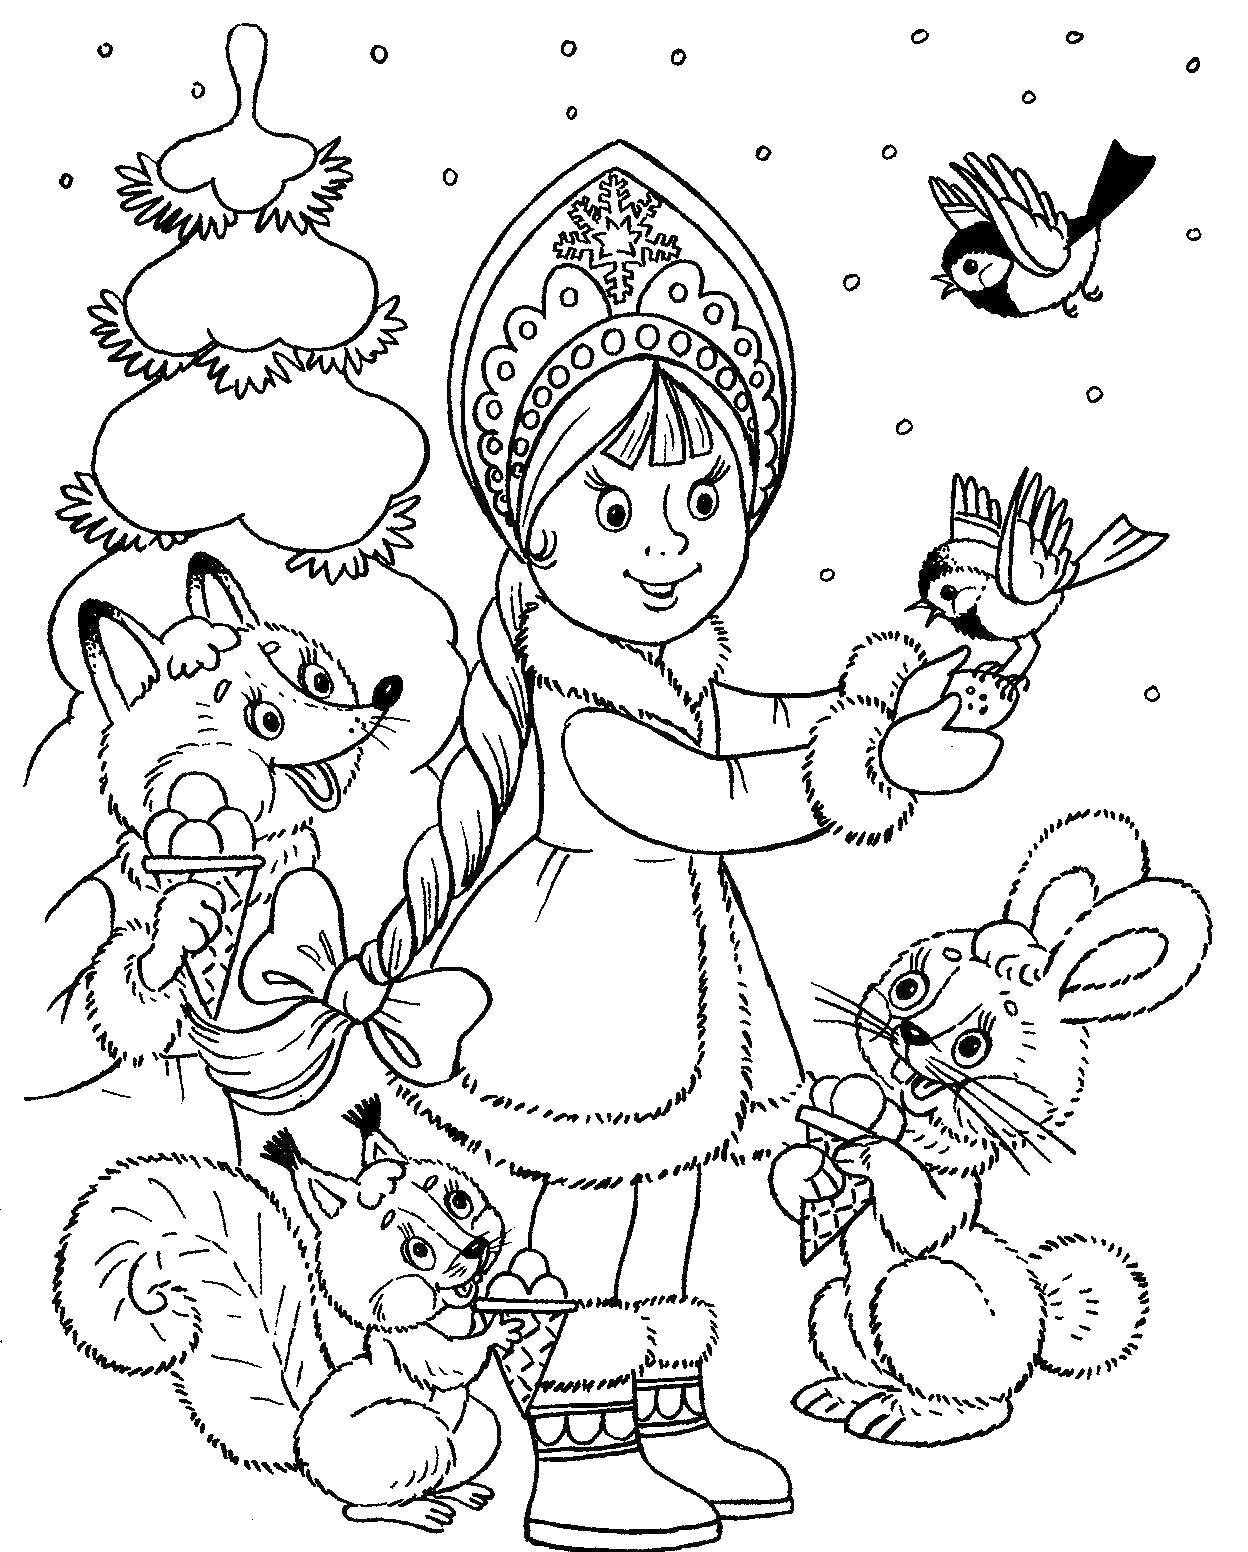 Coloring The snow maiden and animals. Category maiden. Tags:  Snow maiden, winter, New Year, forest.